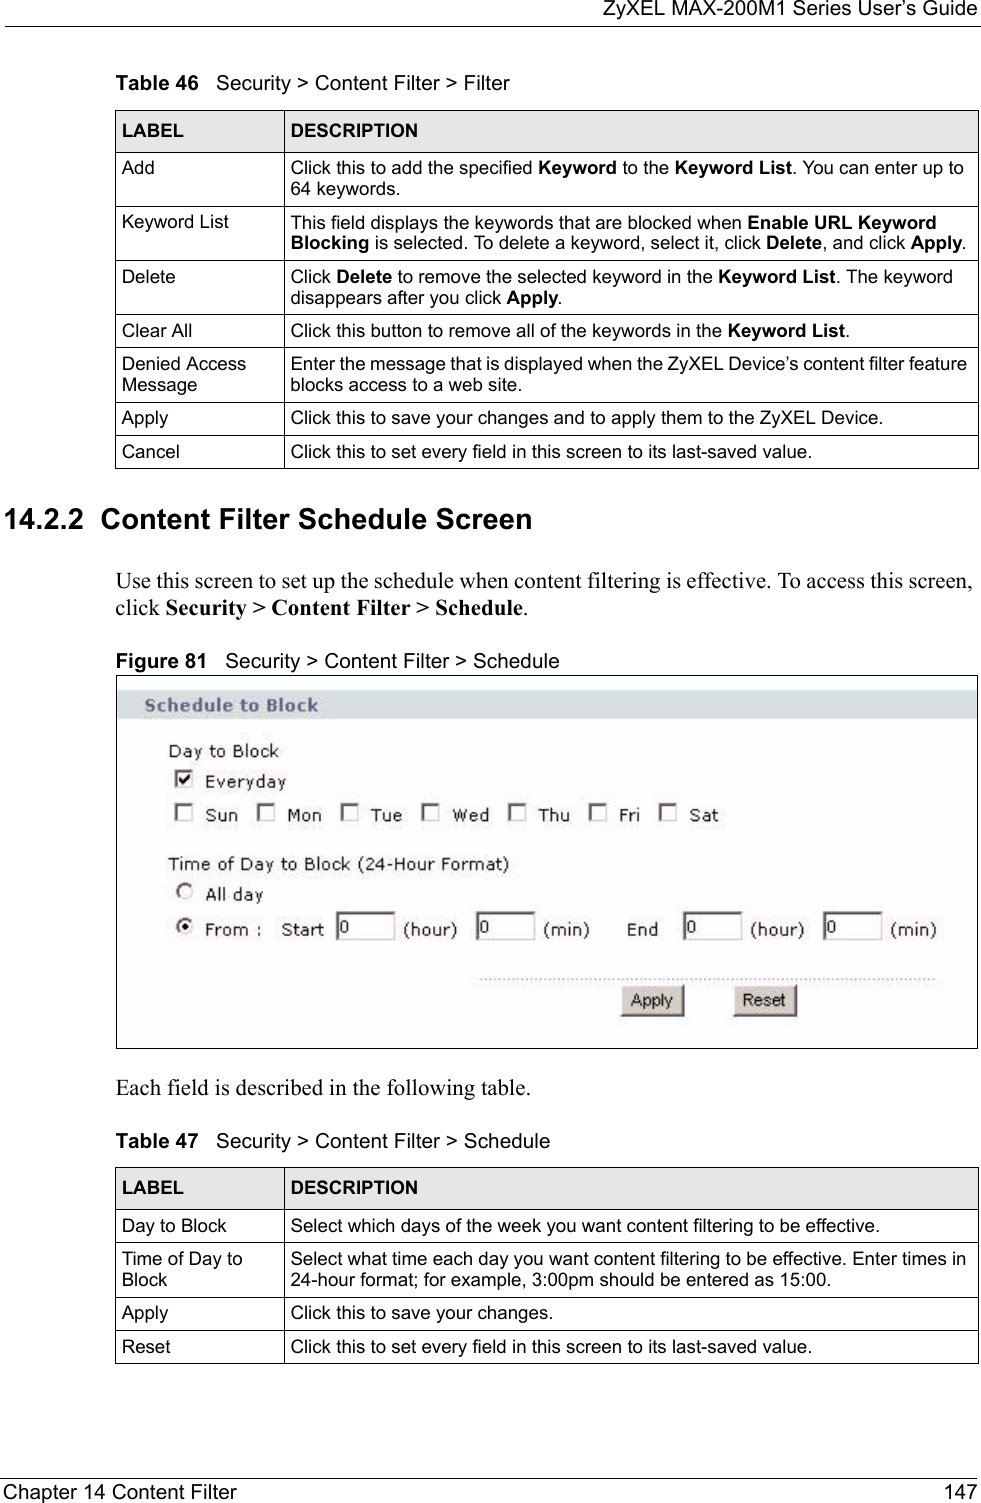 ZyXEL MAX-200M1 Series User’s GuideChapter 14 Content Filter 14714.2.2  Content Filter Schedule ScreenUse this screen to set up the schedule when content filtering is effective. To access this screen, click Security &gt; Content Filter &gt; Schedule.Figure 81   Security &gt; Content Filter &gt; ScheduleEach field is described in the following table.Add Click this to add the specified Keyword to the Keyword List. You can enter up to 64 keywords.Keyword List This field displays the keywords that are blocked when Enable URL Keyword Blocking is selected. To delete a keyword, select it, click Delete, and click Apply.Delete Click Delete to remove the selected keyword in the Keyword List. The keyword disappears after you click Apply.Clear All Click this button to remove all of the keywords in the Keyword List.Denied Access MessageEnter the message that is displayed when the ZyXEL Device’s content filter feature blocks access to a web site.Apply Click this to save your changes and to apply them to the ZyXEL Device.Cancel Click this to set every field in this screen to its last-saved value.Table 46   Security &gt; Content Filter &gt; FilterLABEL DESCRIPTIONTable 47   Security &gt; Content Filter &gt; ScheduleLABEL DESCRIPTIONDay to Block Select which days of the week you want content filtering to be effective.Time of Day to BlockSelect what time each day you want content filtering to be effective. Enter times in 24-hour format; for example, 3:00pm should be entered as 15:00.Apply Click this to save your changes.Reset Click this to set every field in this screen to its last-saved value.